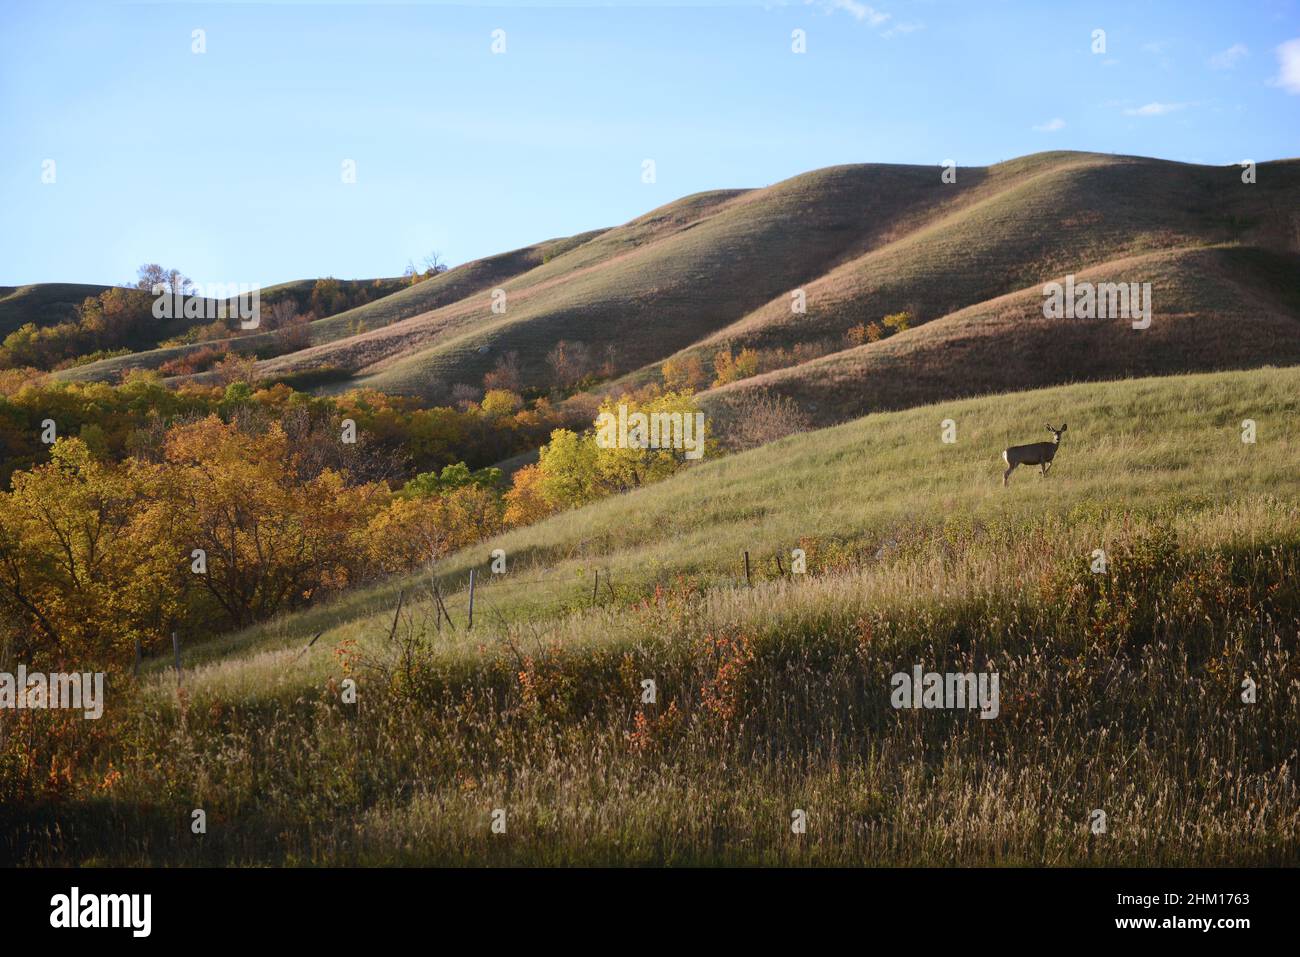 A deer grazing in the field on a fall evening Stock Photo